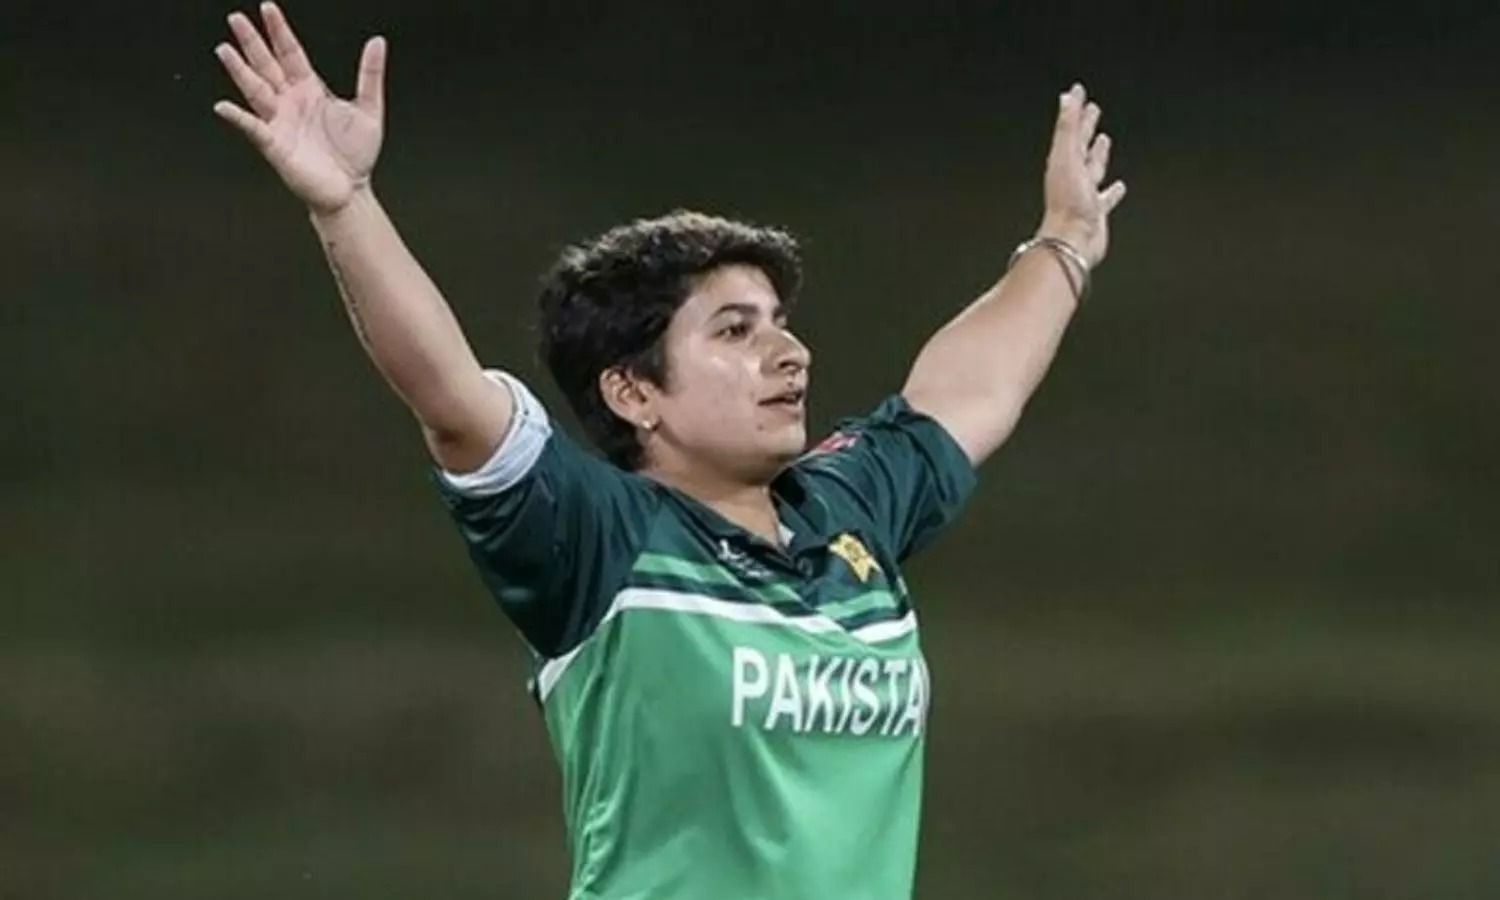 Pakistan spinner nida dar bowl 7 ball in an over against india